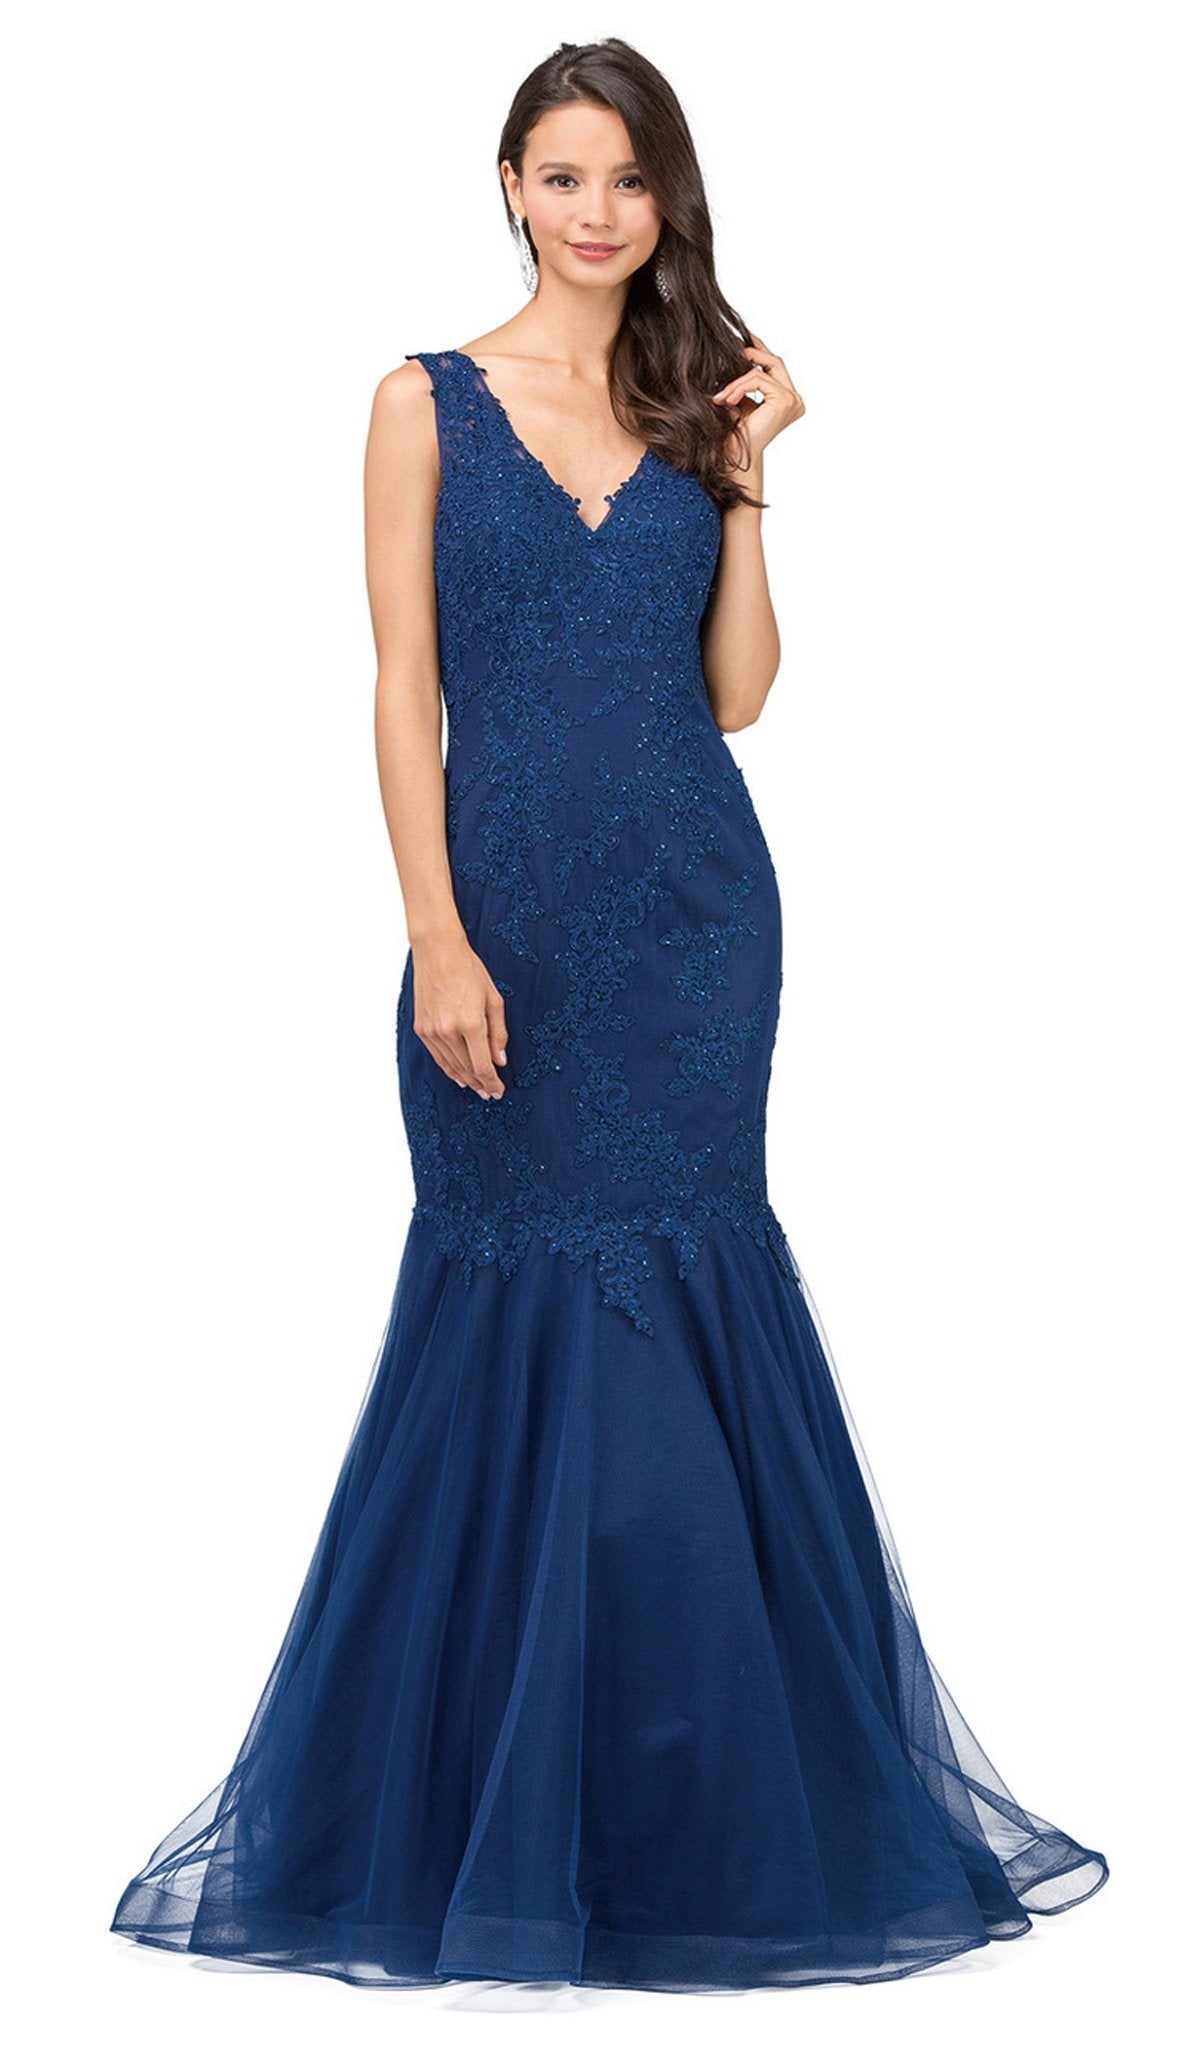 Dancing Queen - 2383 V-neck Embellished Mermaid Prom Gown